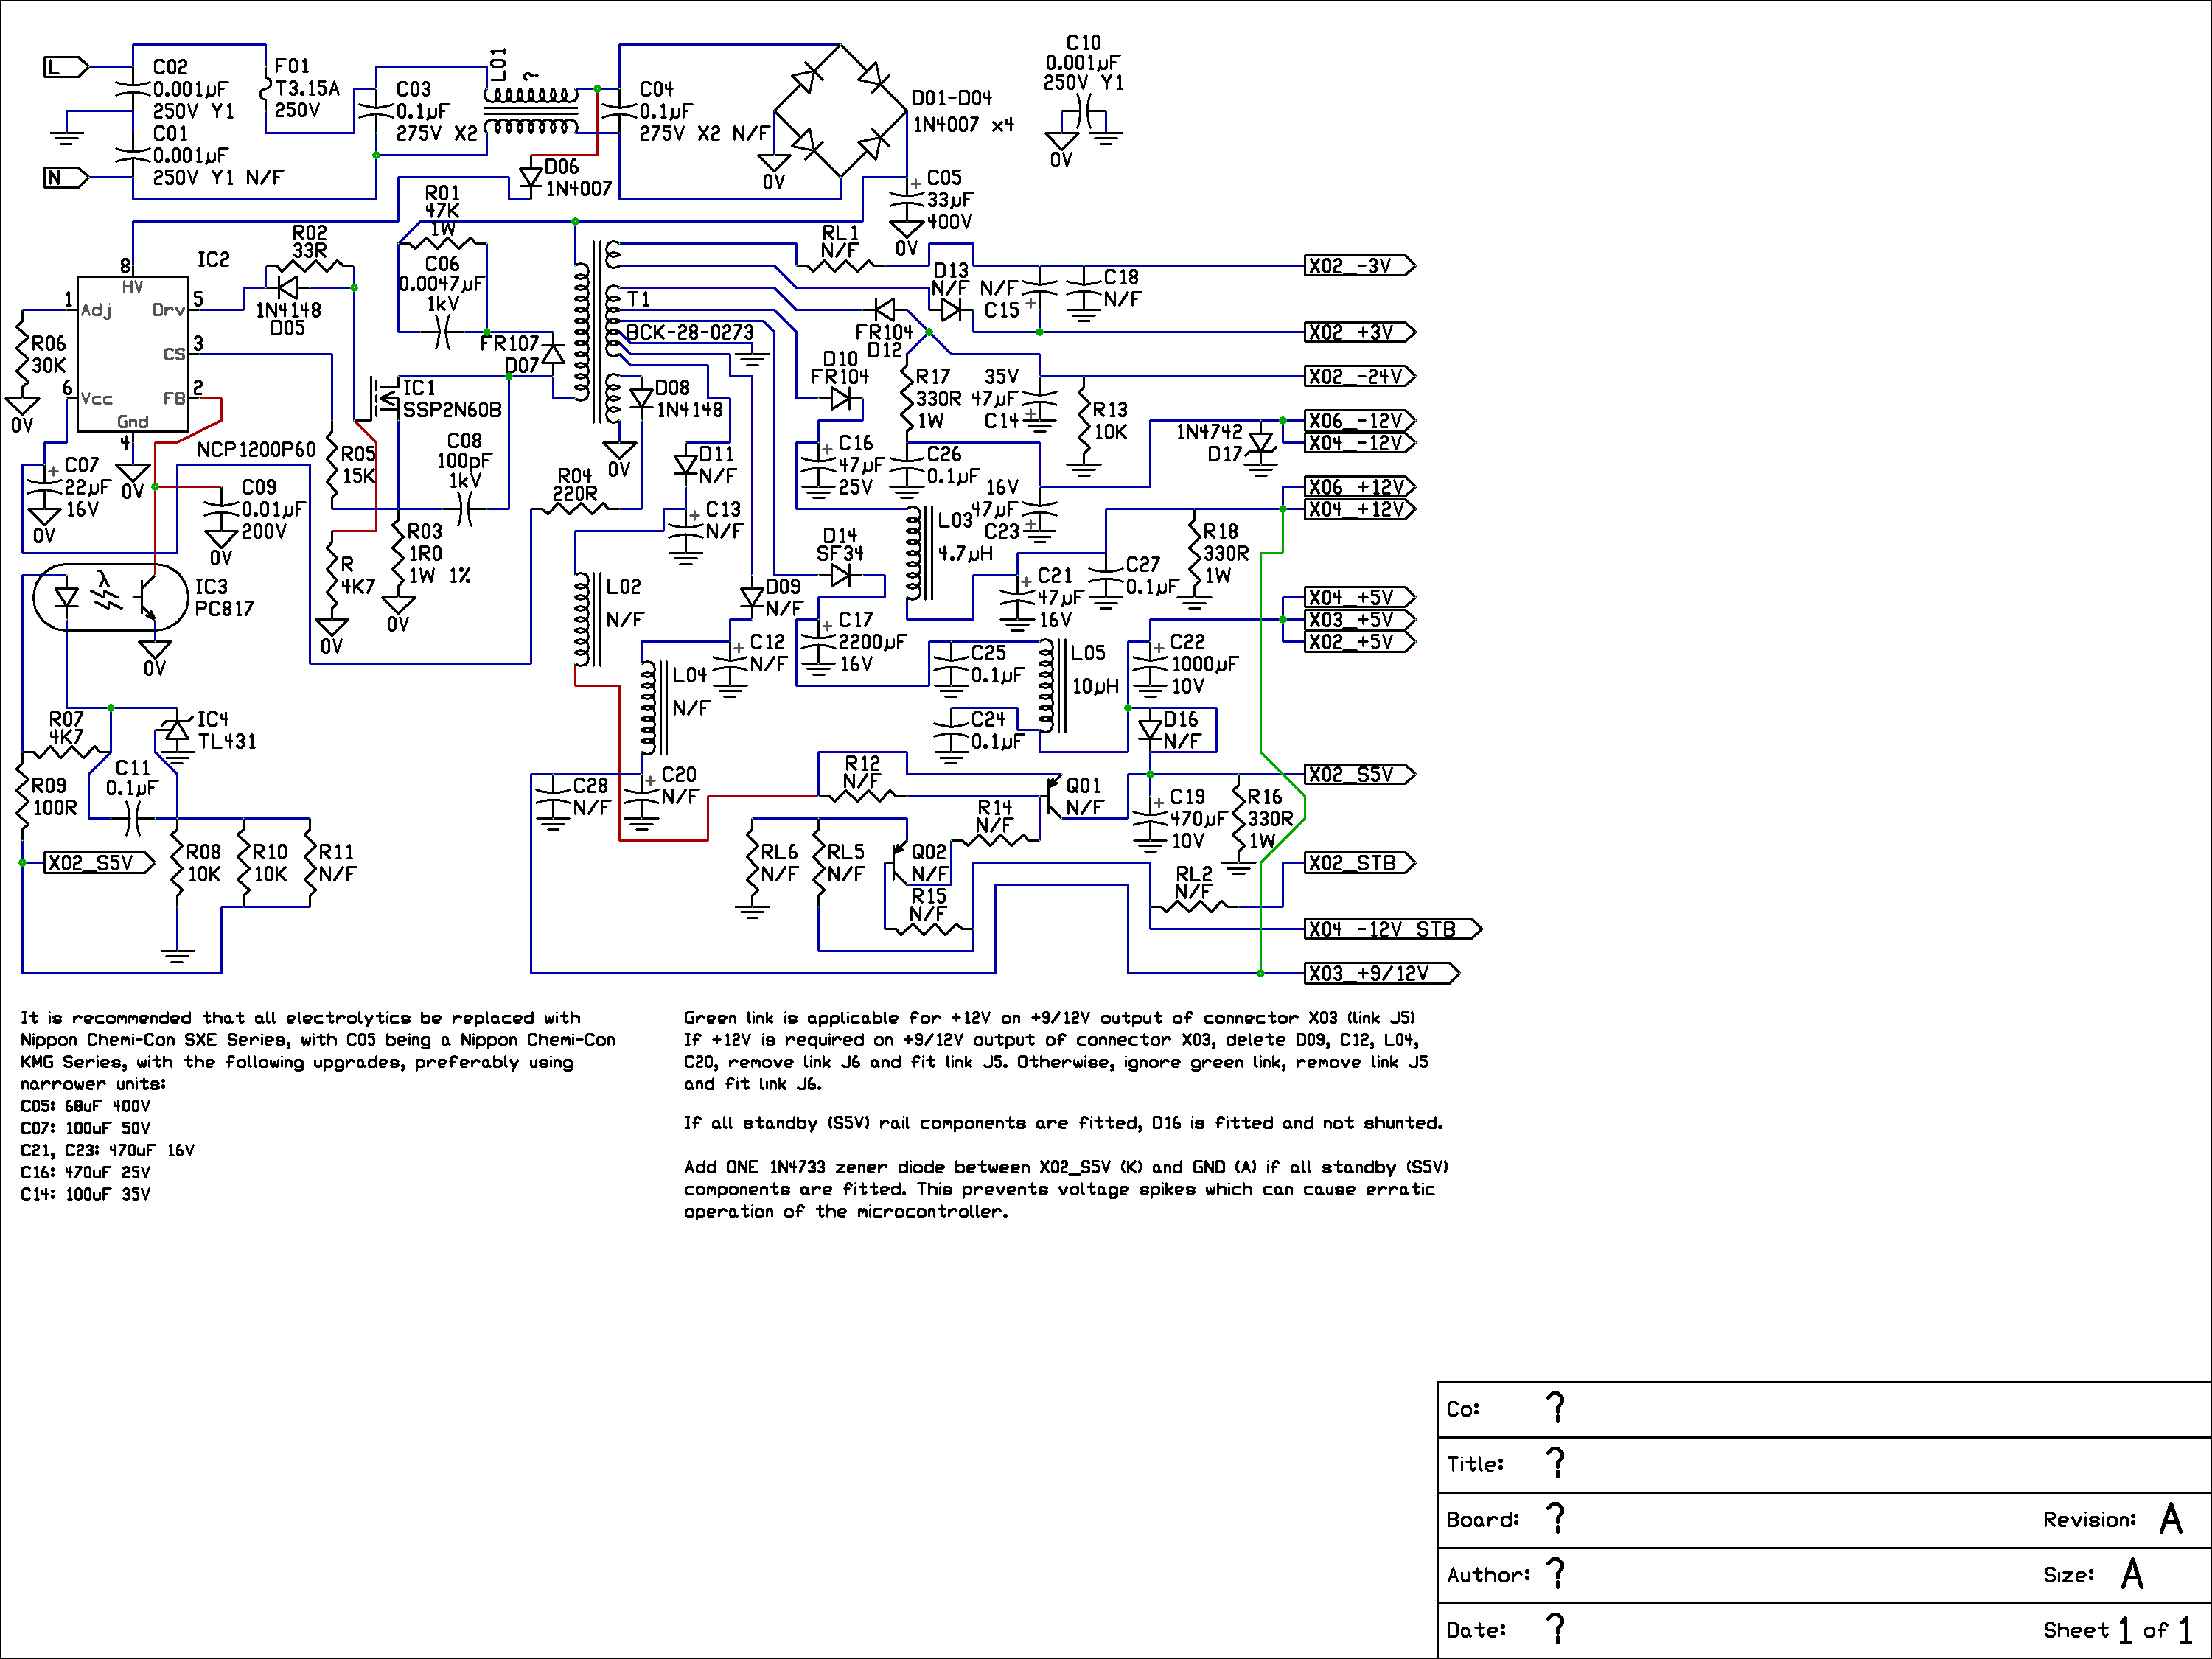 DSE G1607 Circuit diagram for DSE G1607 DVD player.